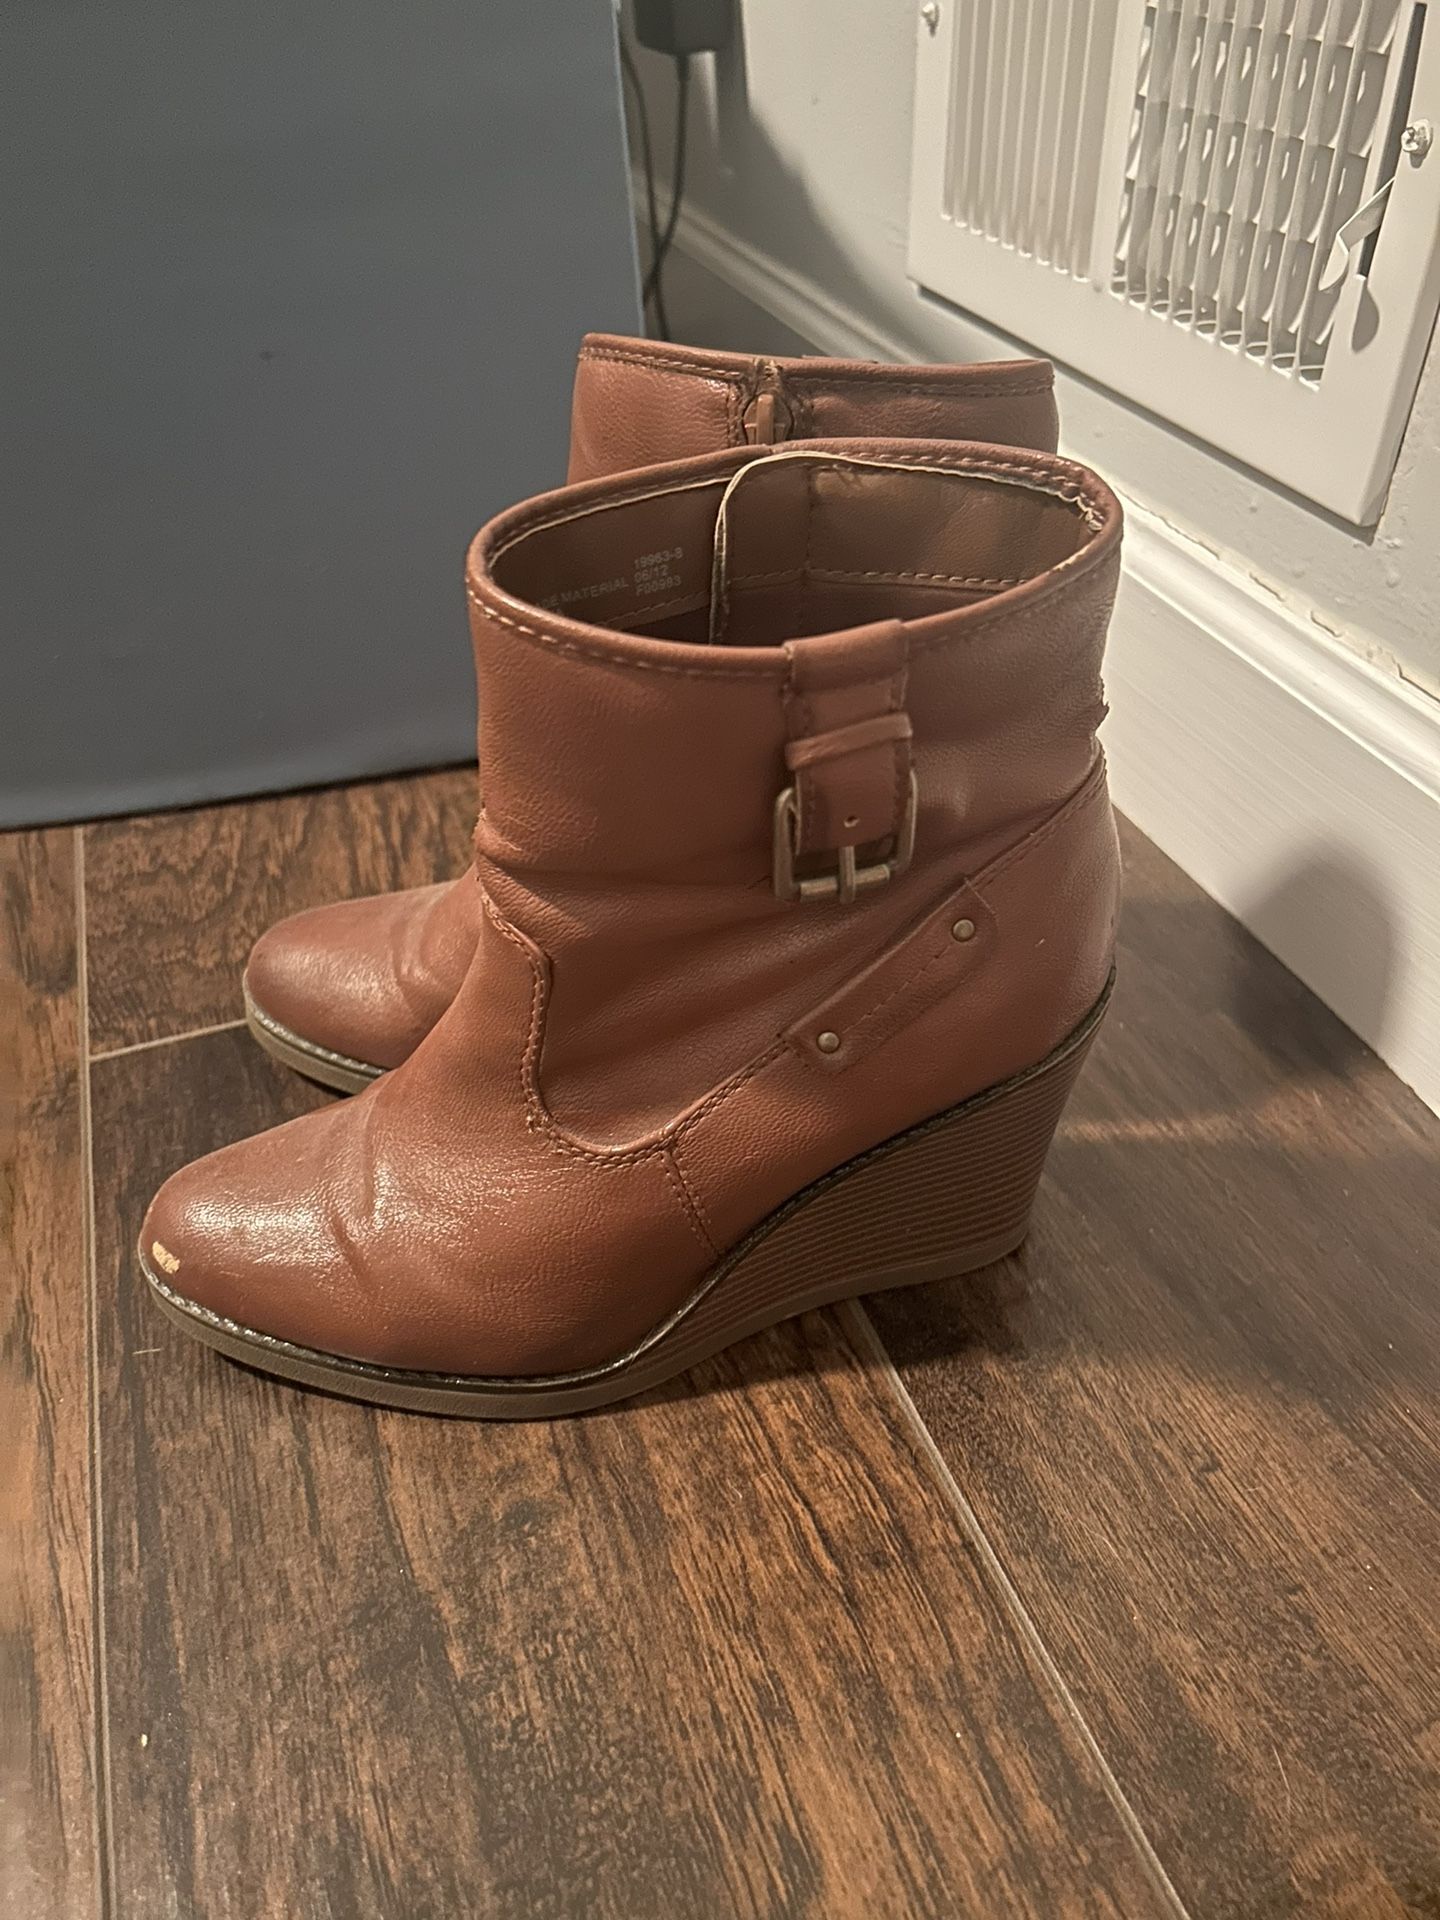 Women’s Brown Wedge Boots Size 9